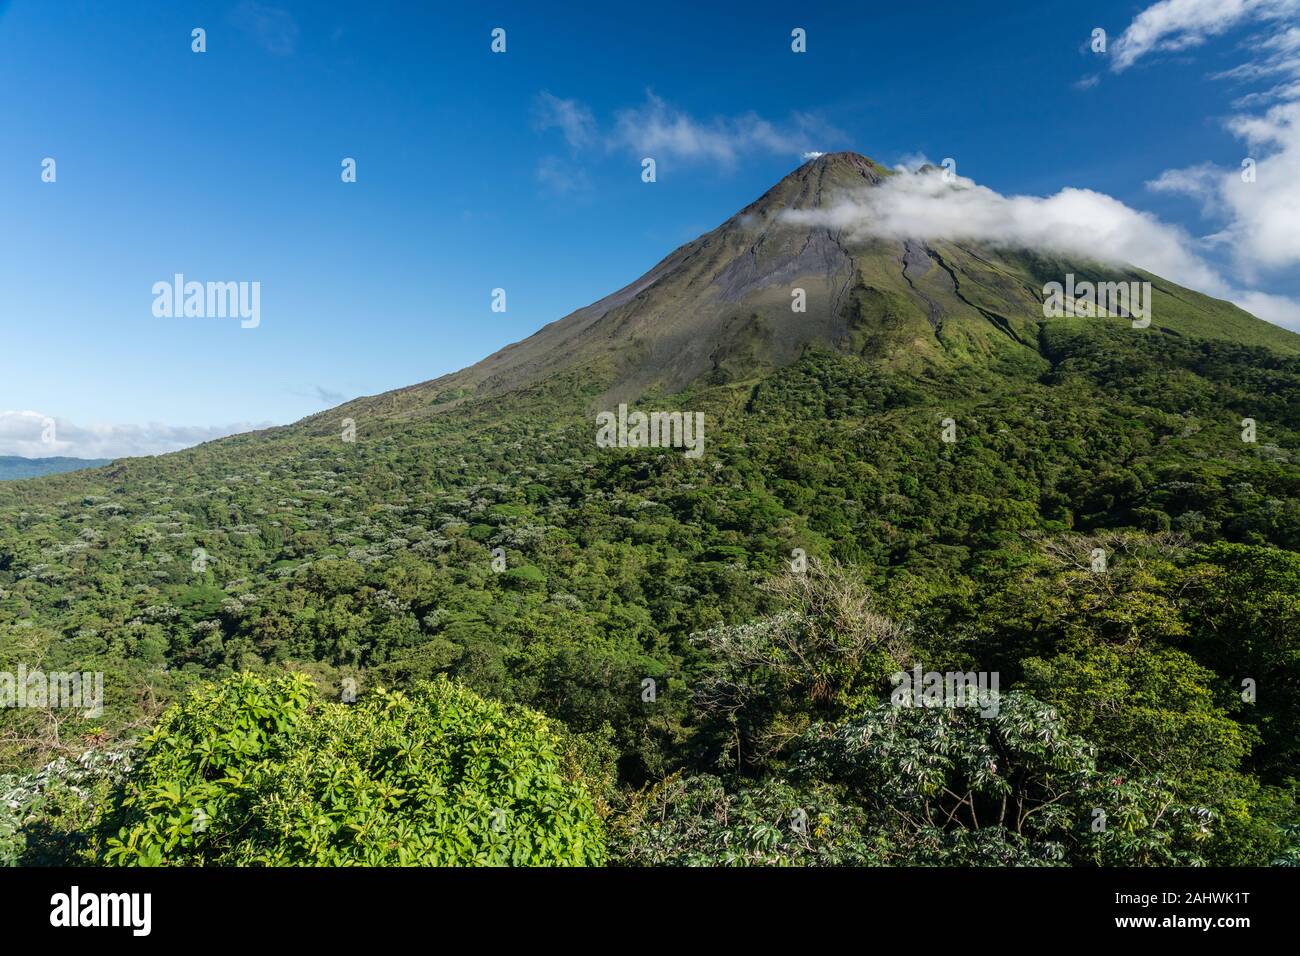 Arenal volcano in Costa Rica on a sunny day with blue sky and rainforest in the foreground.Arenal Volcano National Park, Alajuela province, Costa Rica Stock Photo